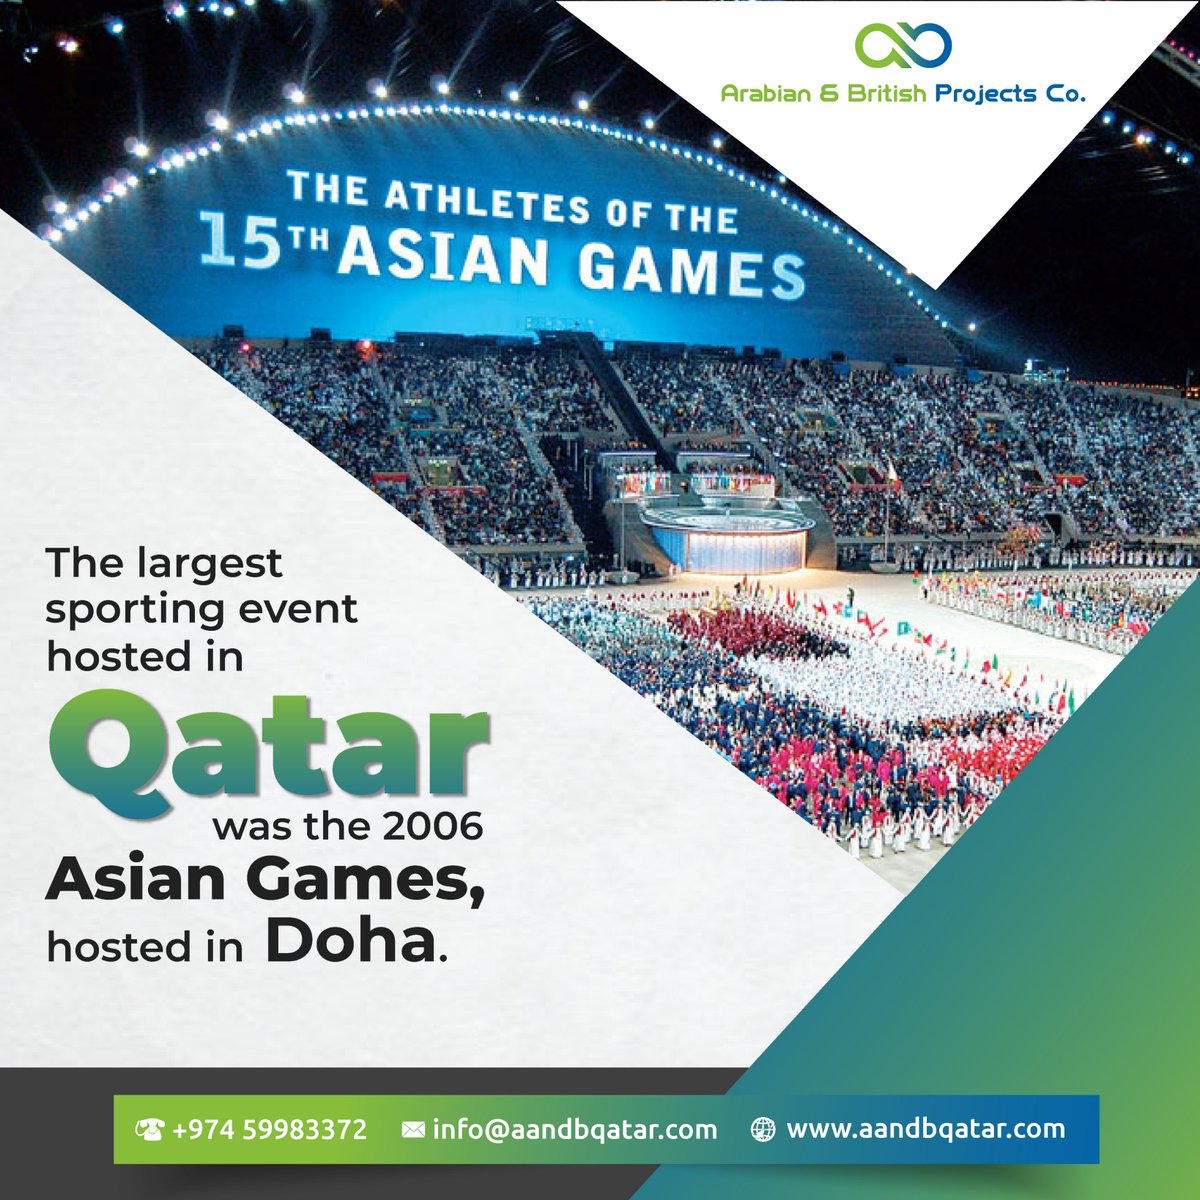 Throwback to Qatar's monumental moment in sports history

#AandBprojects #Qatar #oilandgas #Doha  #events  #asiangames